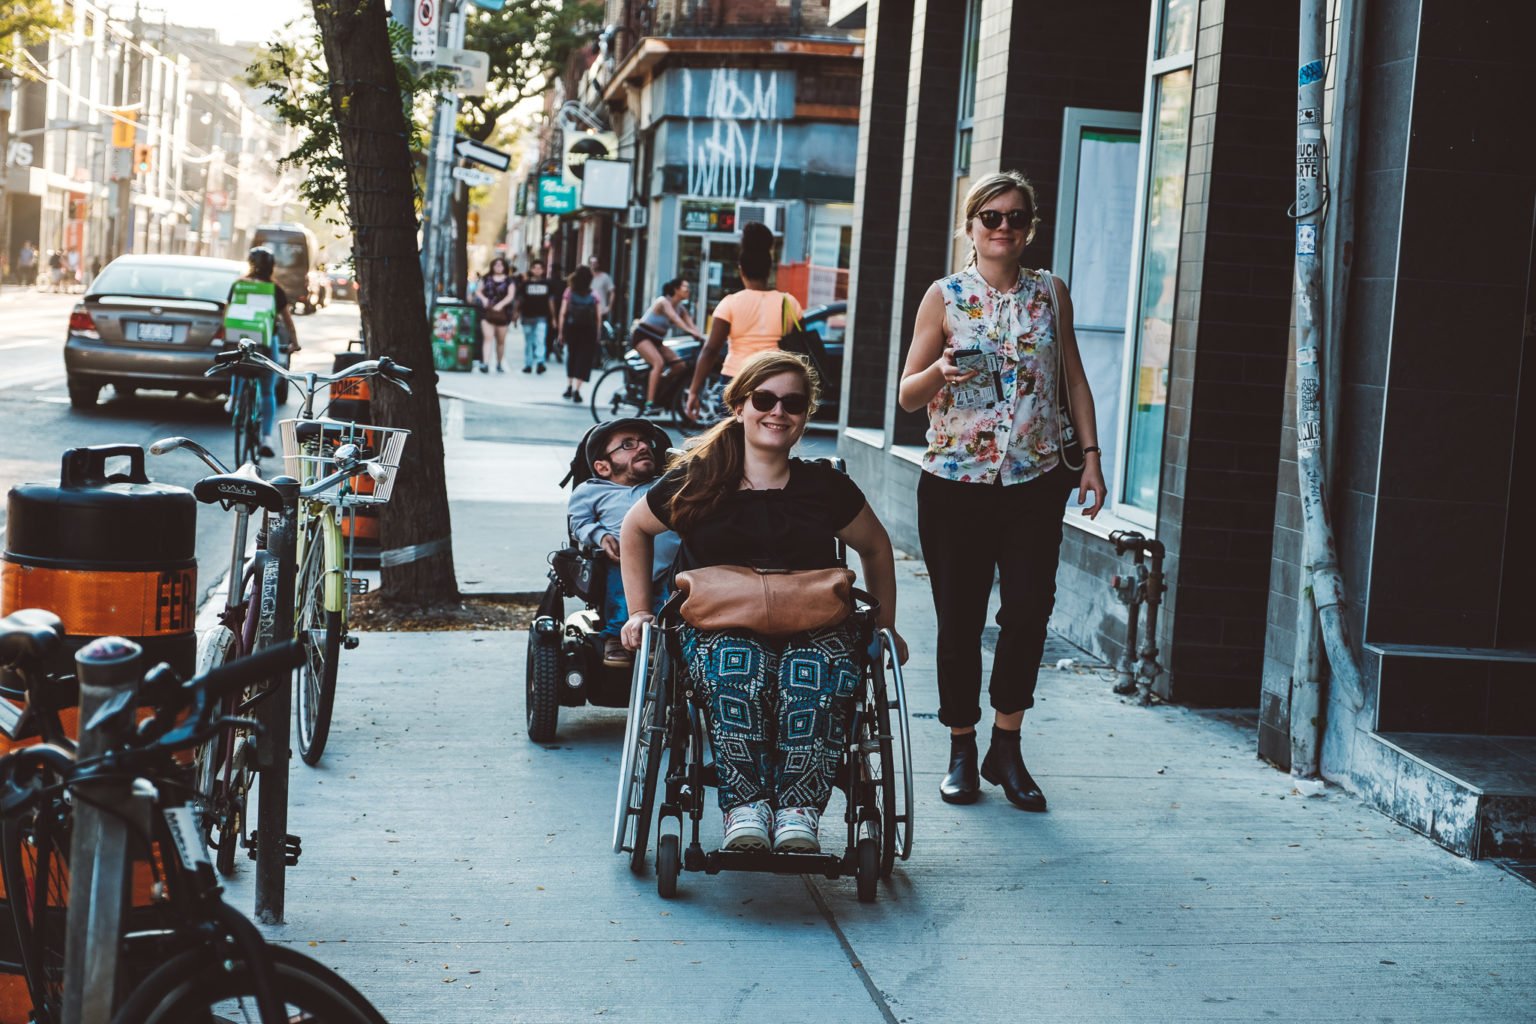 Two wheelchair users and a pedestrian are walking down the street.